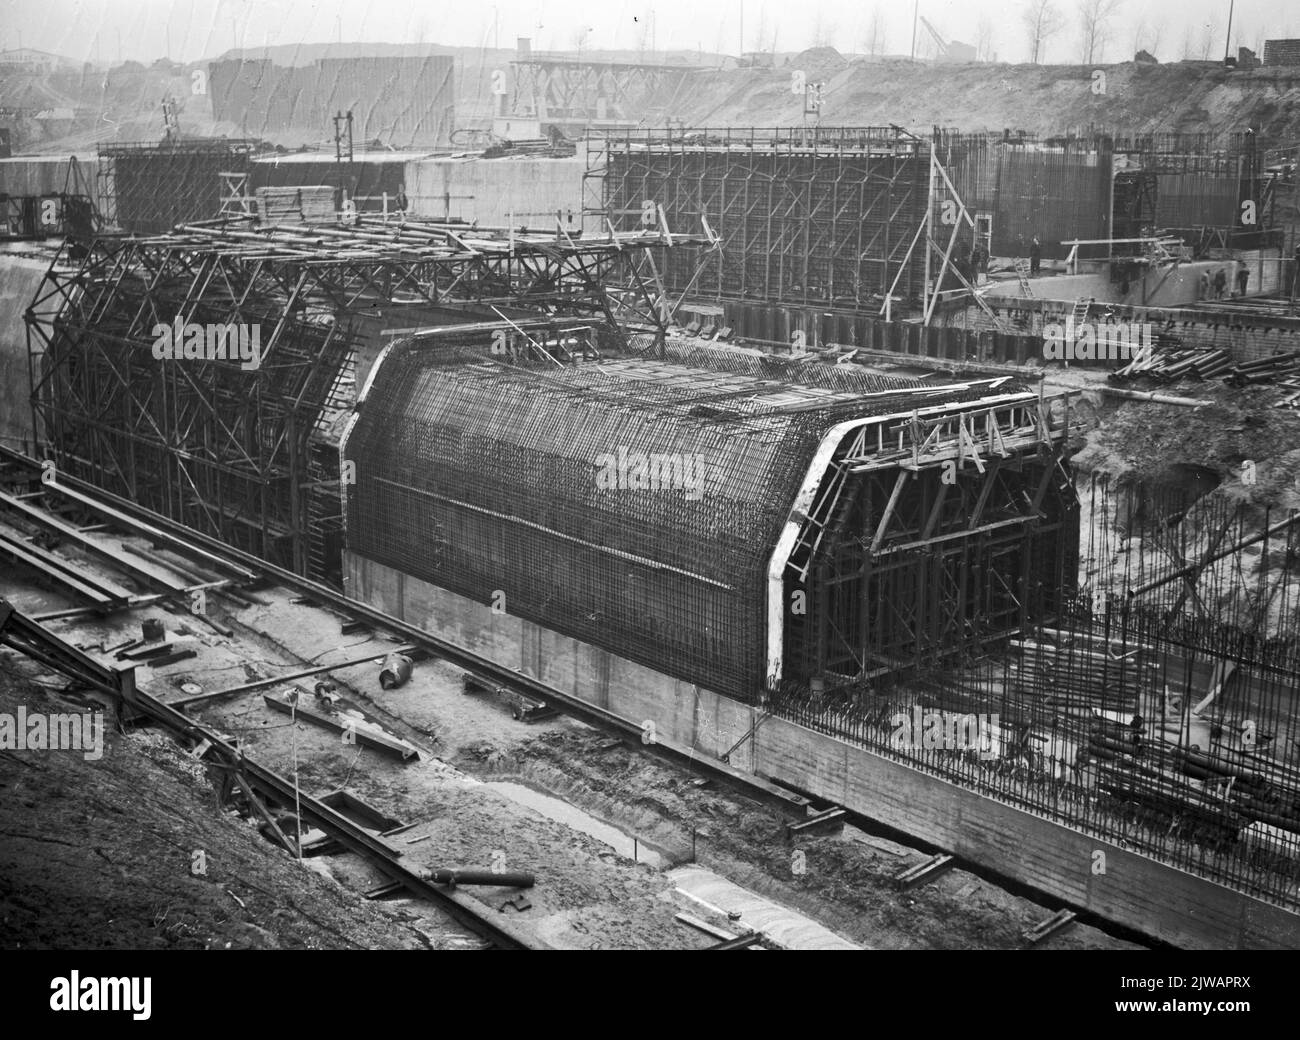 View of the Velsertunnel under construction under the North Sea Canal, between Santpoort Noord and Beverwijk. Stock Photo